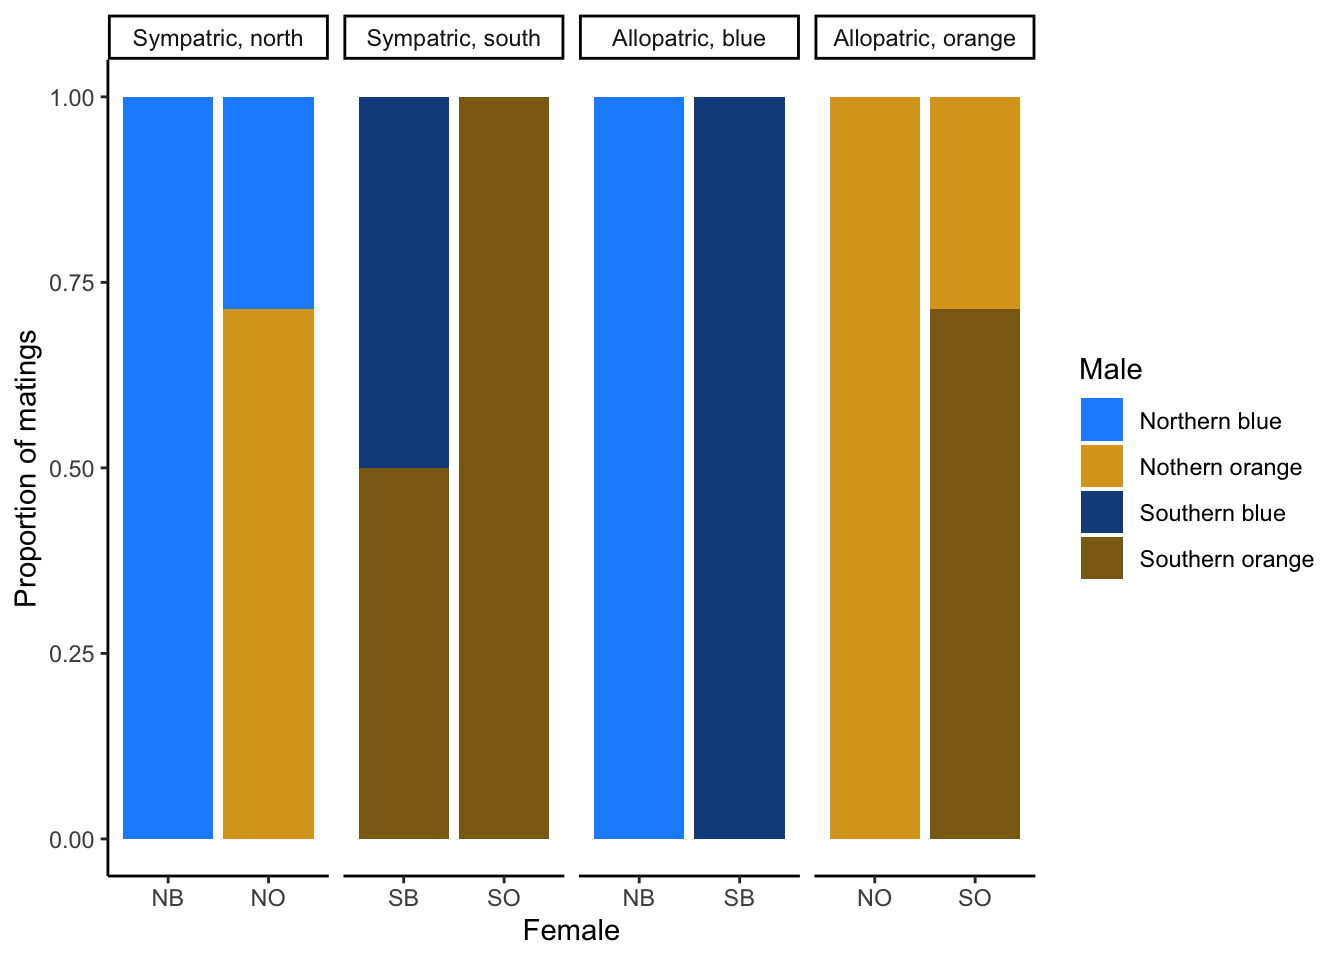 Mating trials with cichlids of the genus *Maylandia* indicated that both sympatric species with different color patterns and allopatric species with similar color patterns are reproductively isolated through female mate choice. [Data](data/11_cichlid-assmat.csv) from Blais et al. (2009).